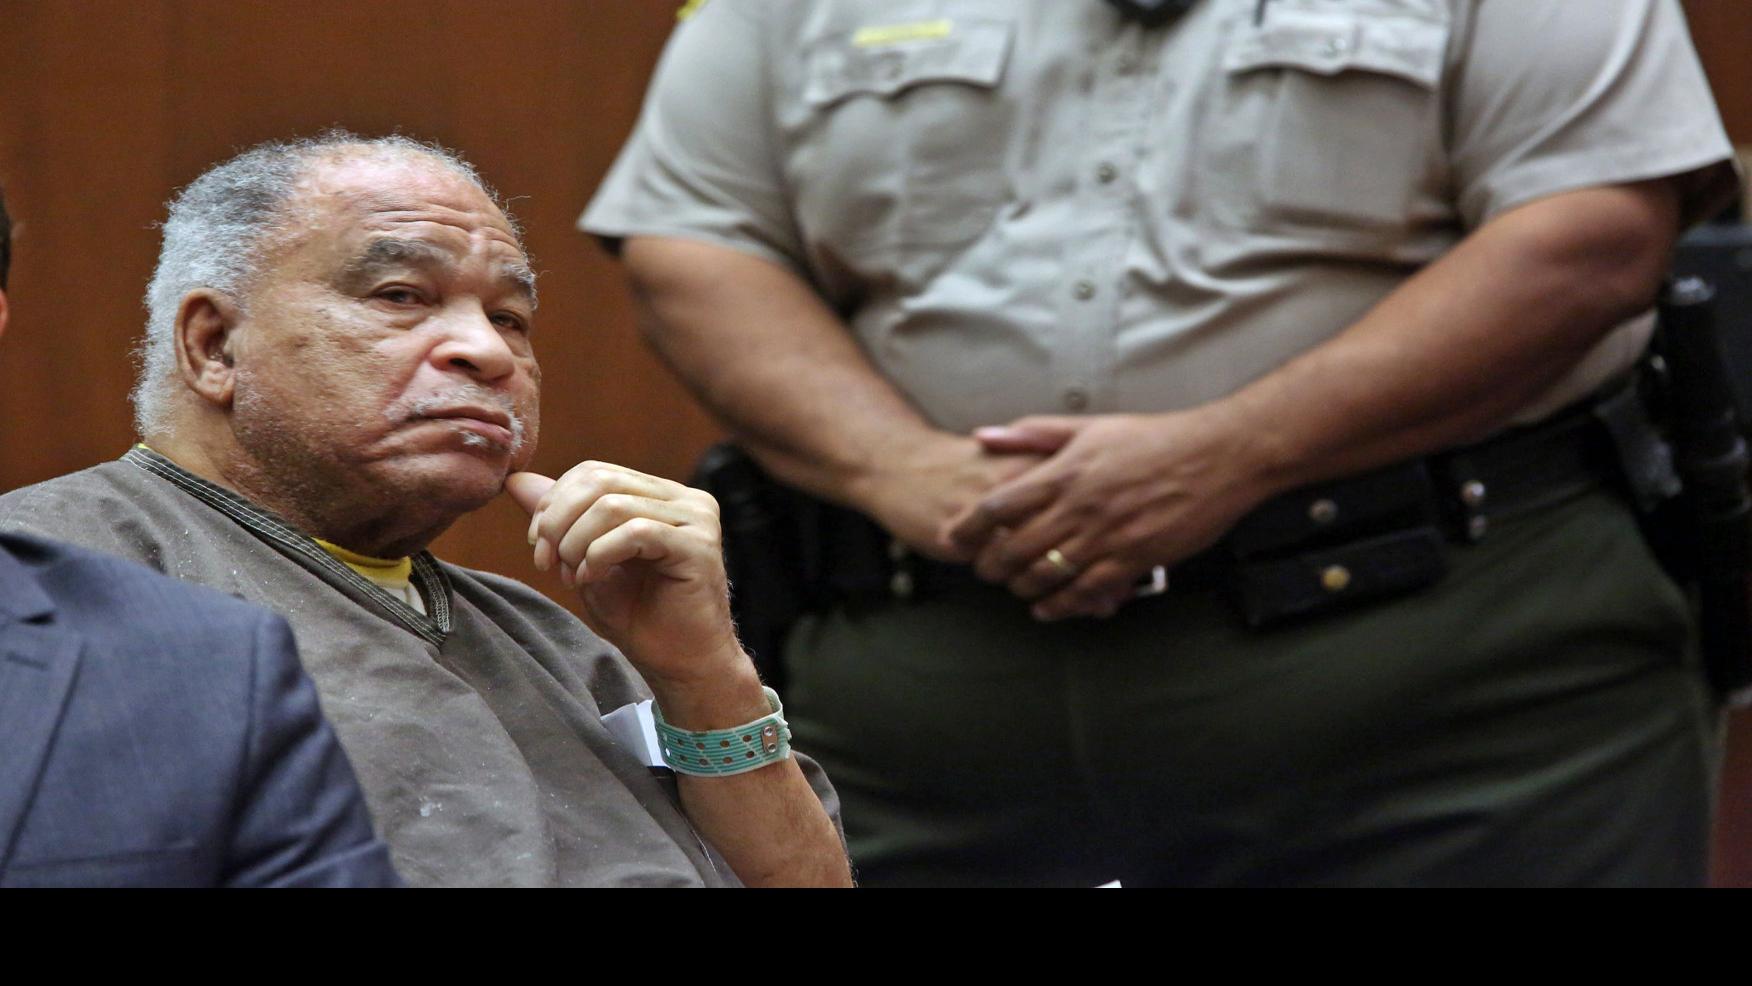 Fbi Confirms Samuel Little Is Most Prolific Serial Killer In Us History With At Least 50 Victims National News Tucson Com samuel little is most prolific serial